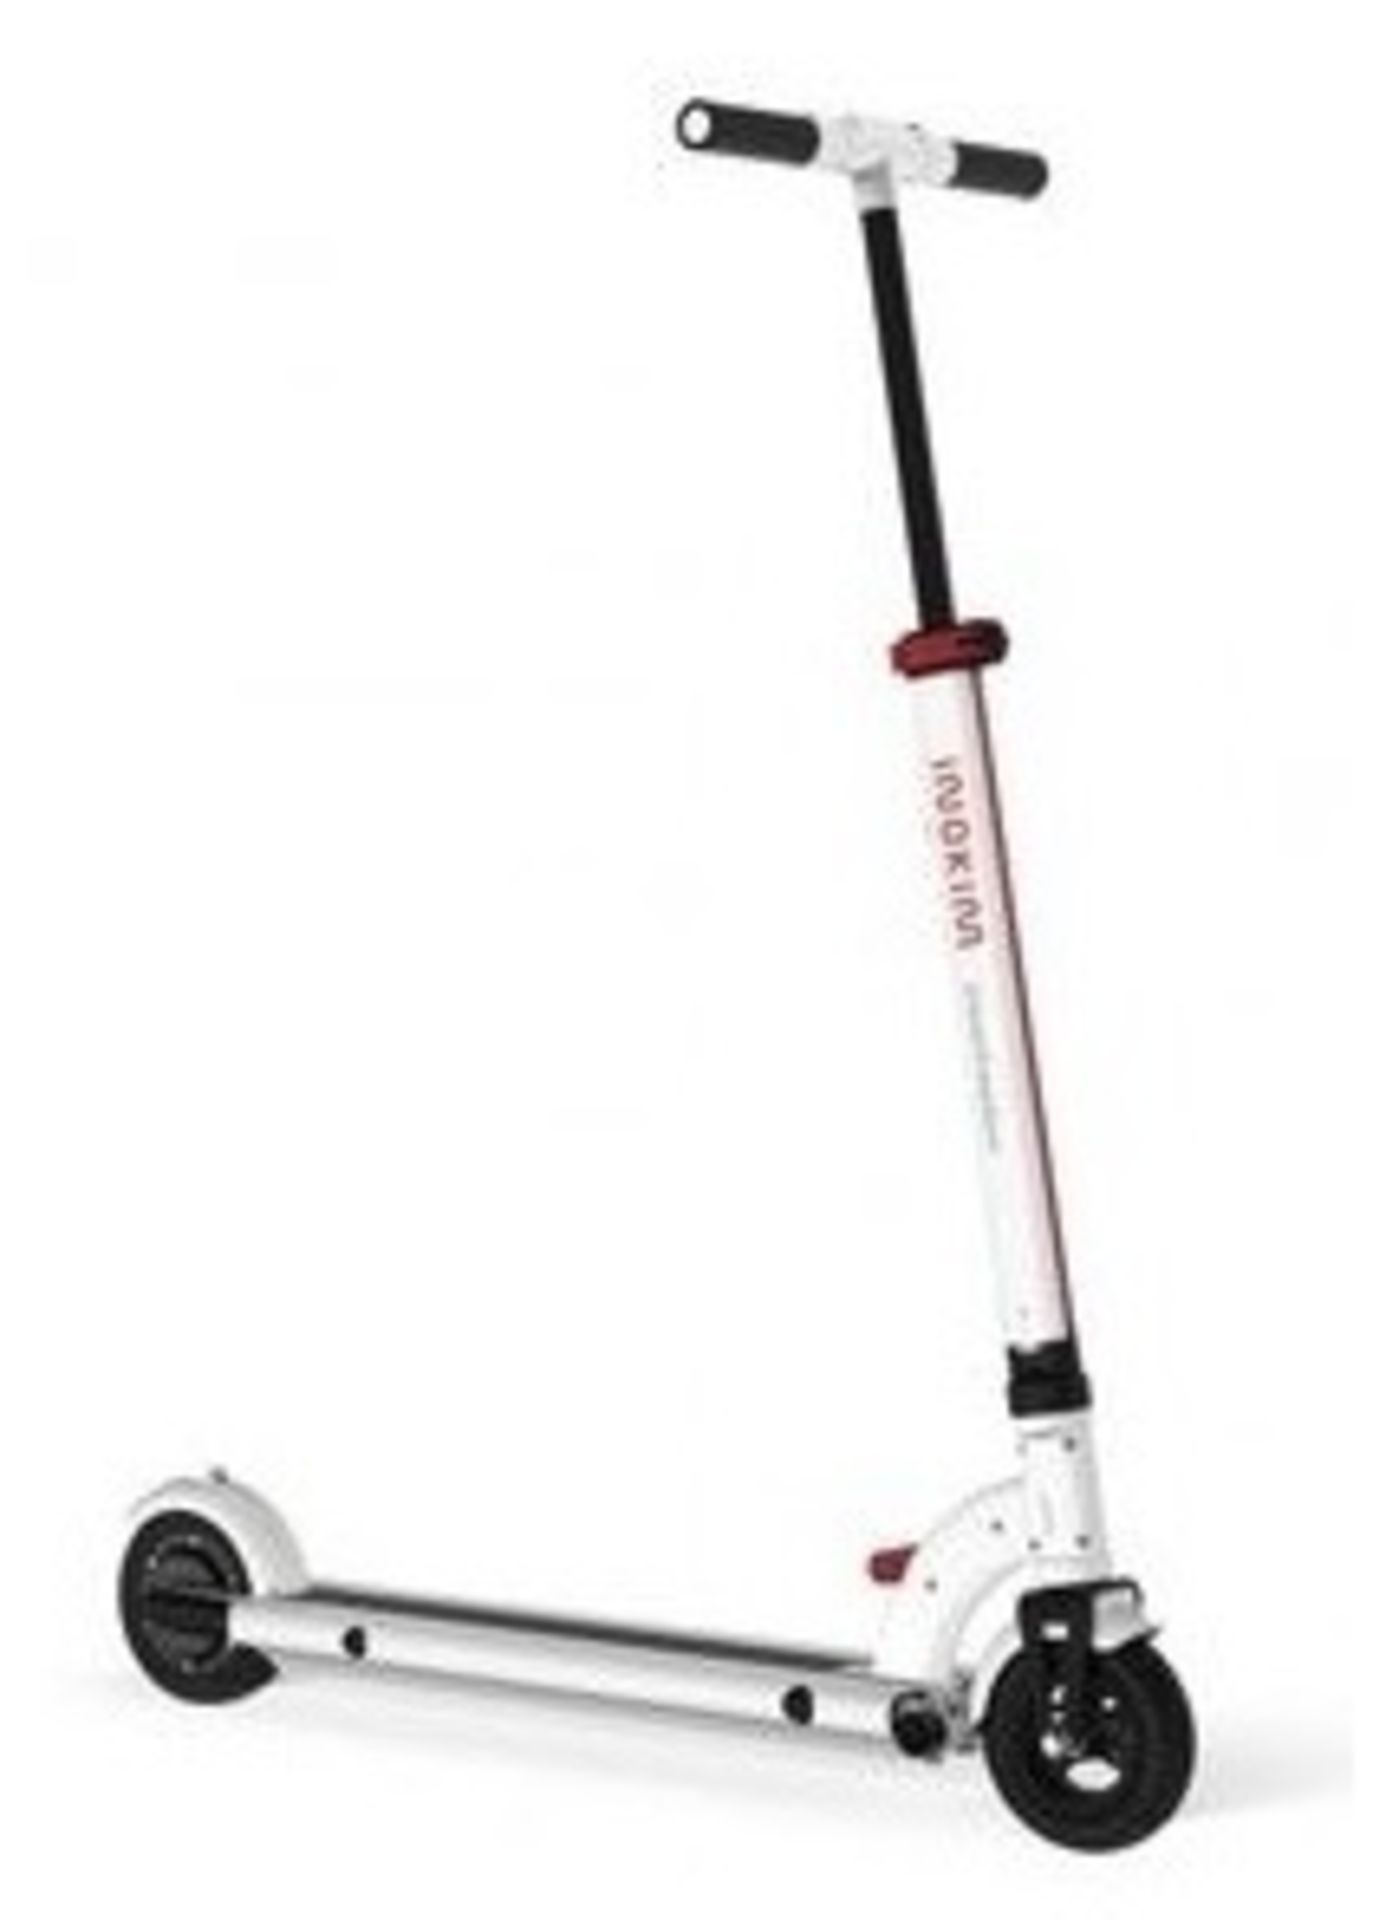 BRAND NEW NOKIM MINI FORCE WHITE 1'SELECTRIC SCOOTER (WHITE) RRP £559